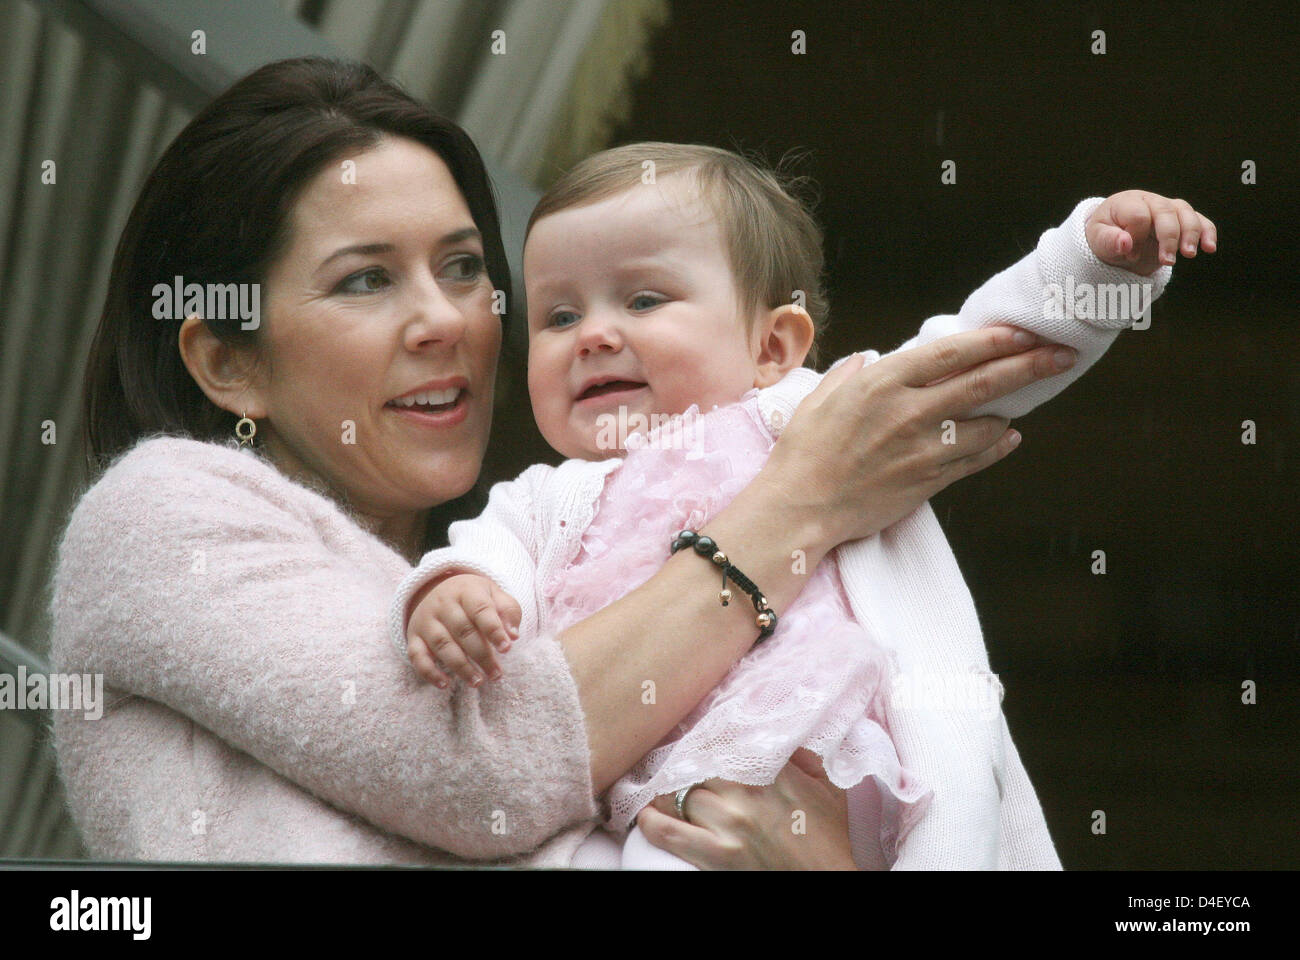 princess-mary-of-denmark-l-smiles-with-her-daughter-princess-isabella-D4EYCA.jpg